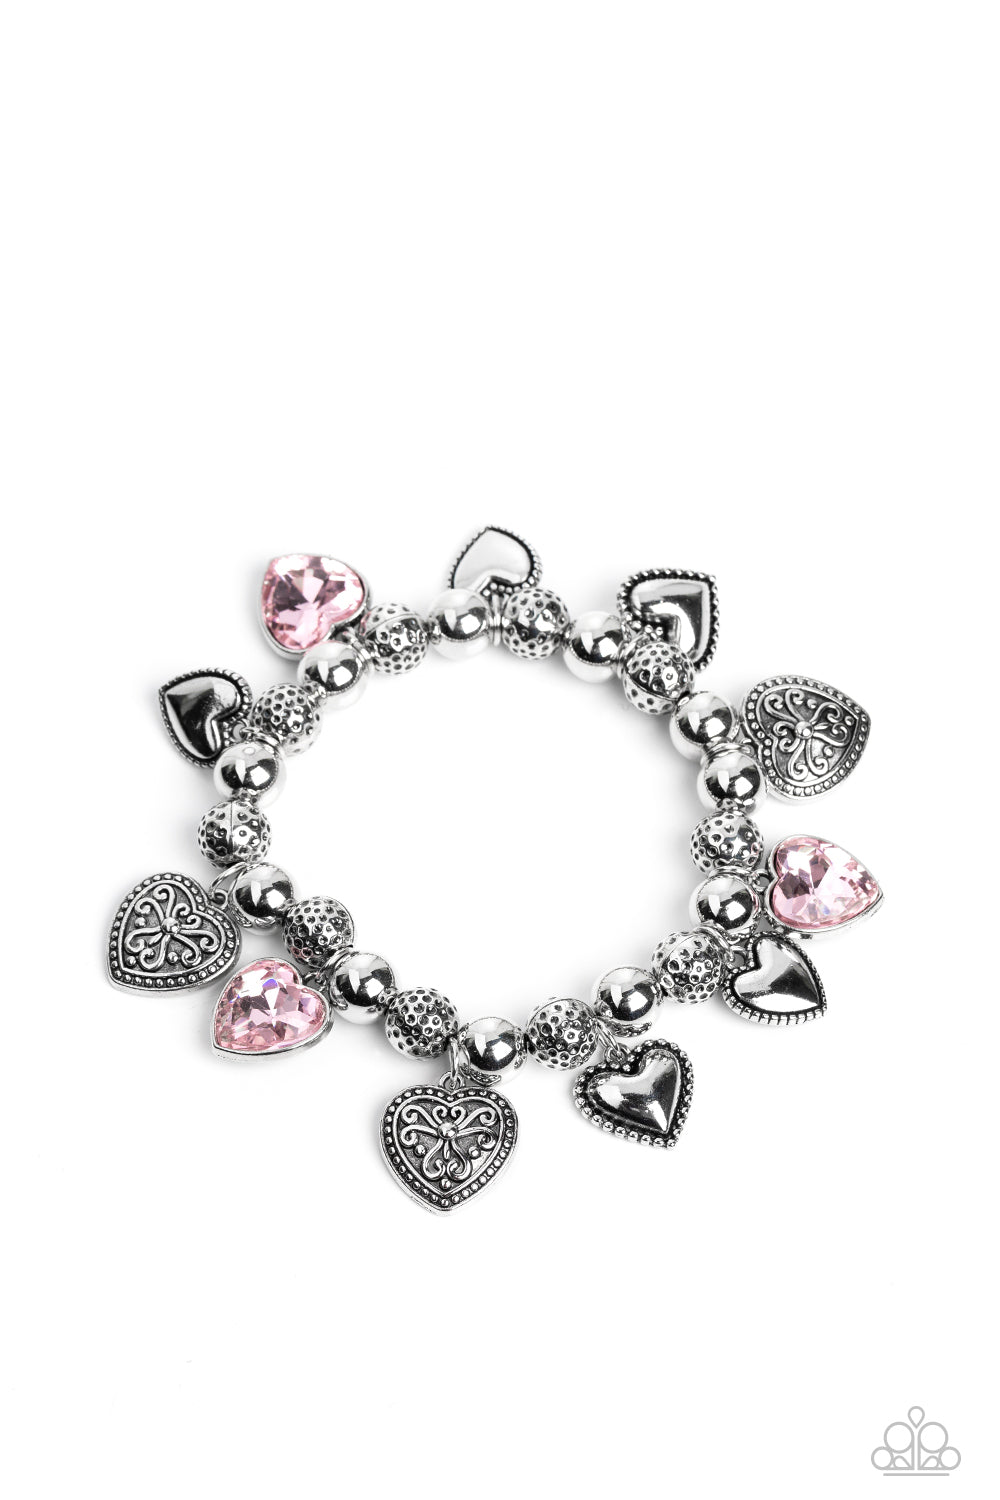 Paparazzi Accessories - Charming Crush - Pink Heart Bracelets decorative silver filigree, silver-studded, and pink gem heart charms swing from a collection of shiny silver beads, and silver beads with a dot motif. Threaded along an elastic stretchy band, the charming bracelet creates a timeless romantic centerpiece around the wrist.  Sold as one individual bracelet.